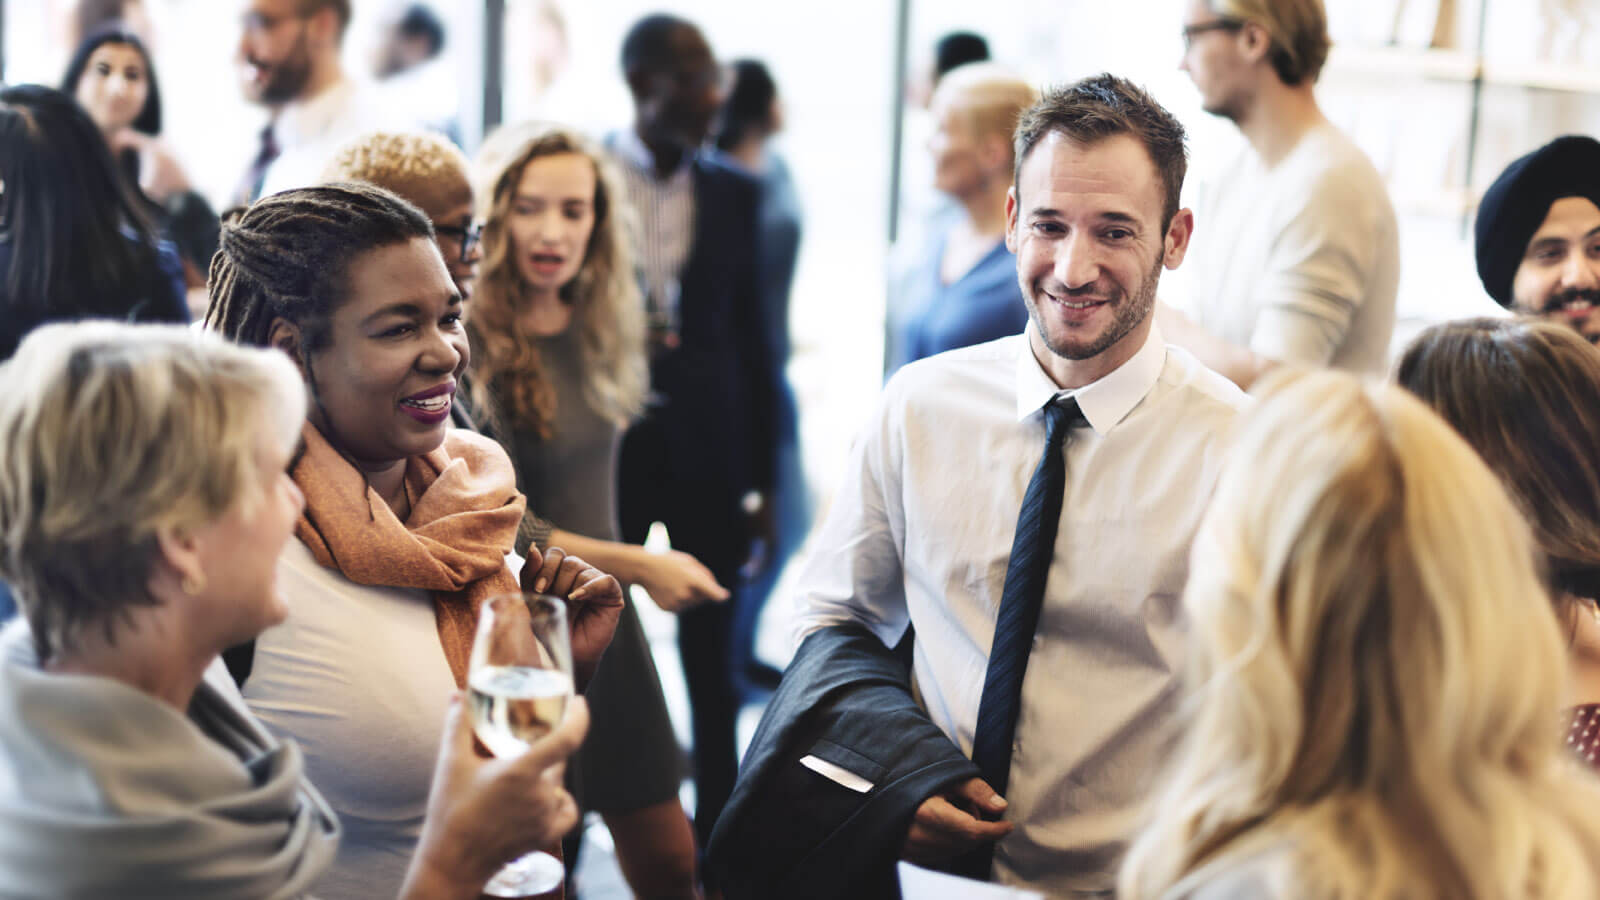 The Art of Networking: Building Meaningful Professional Relationships